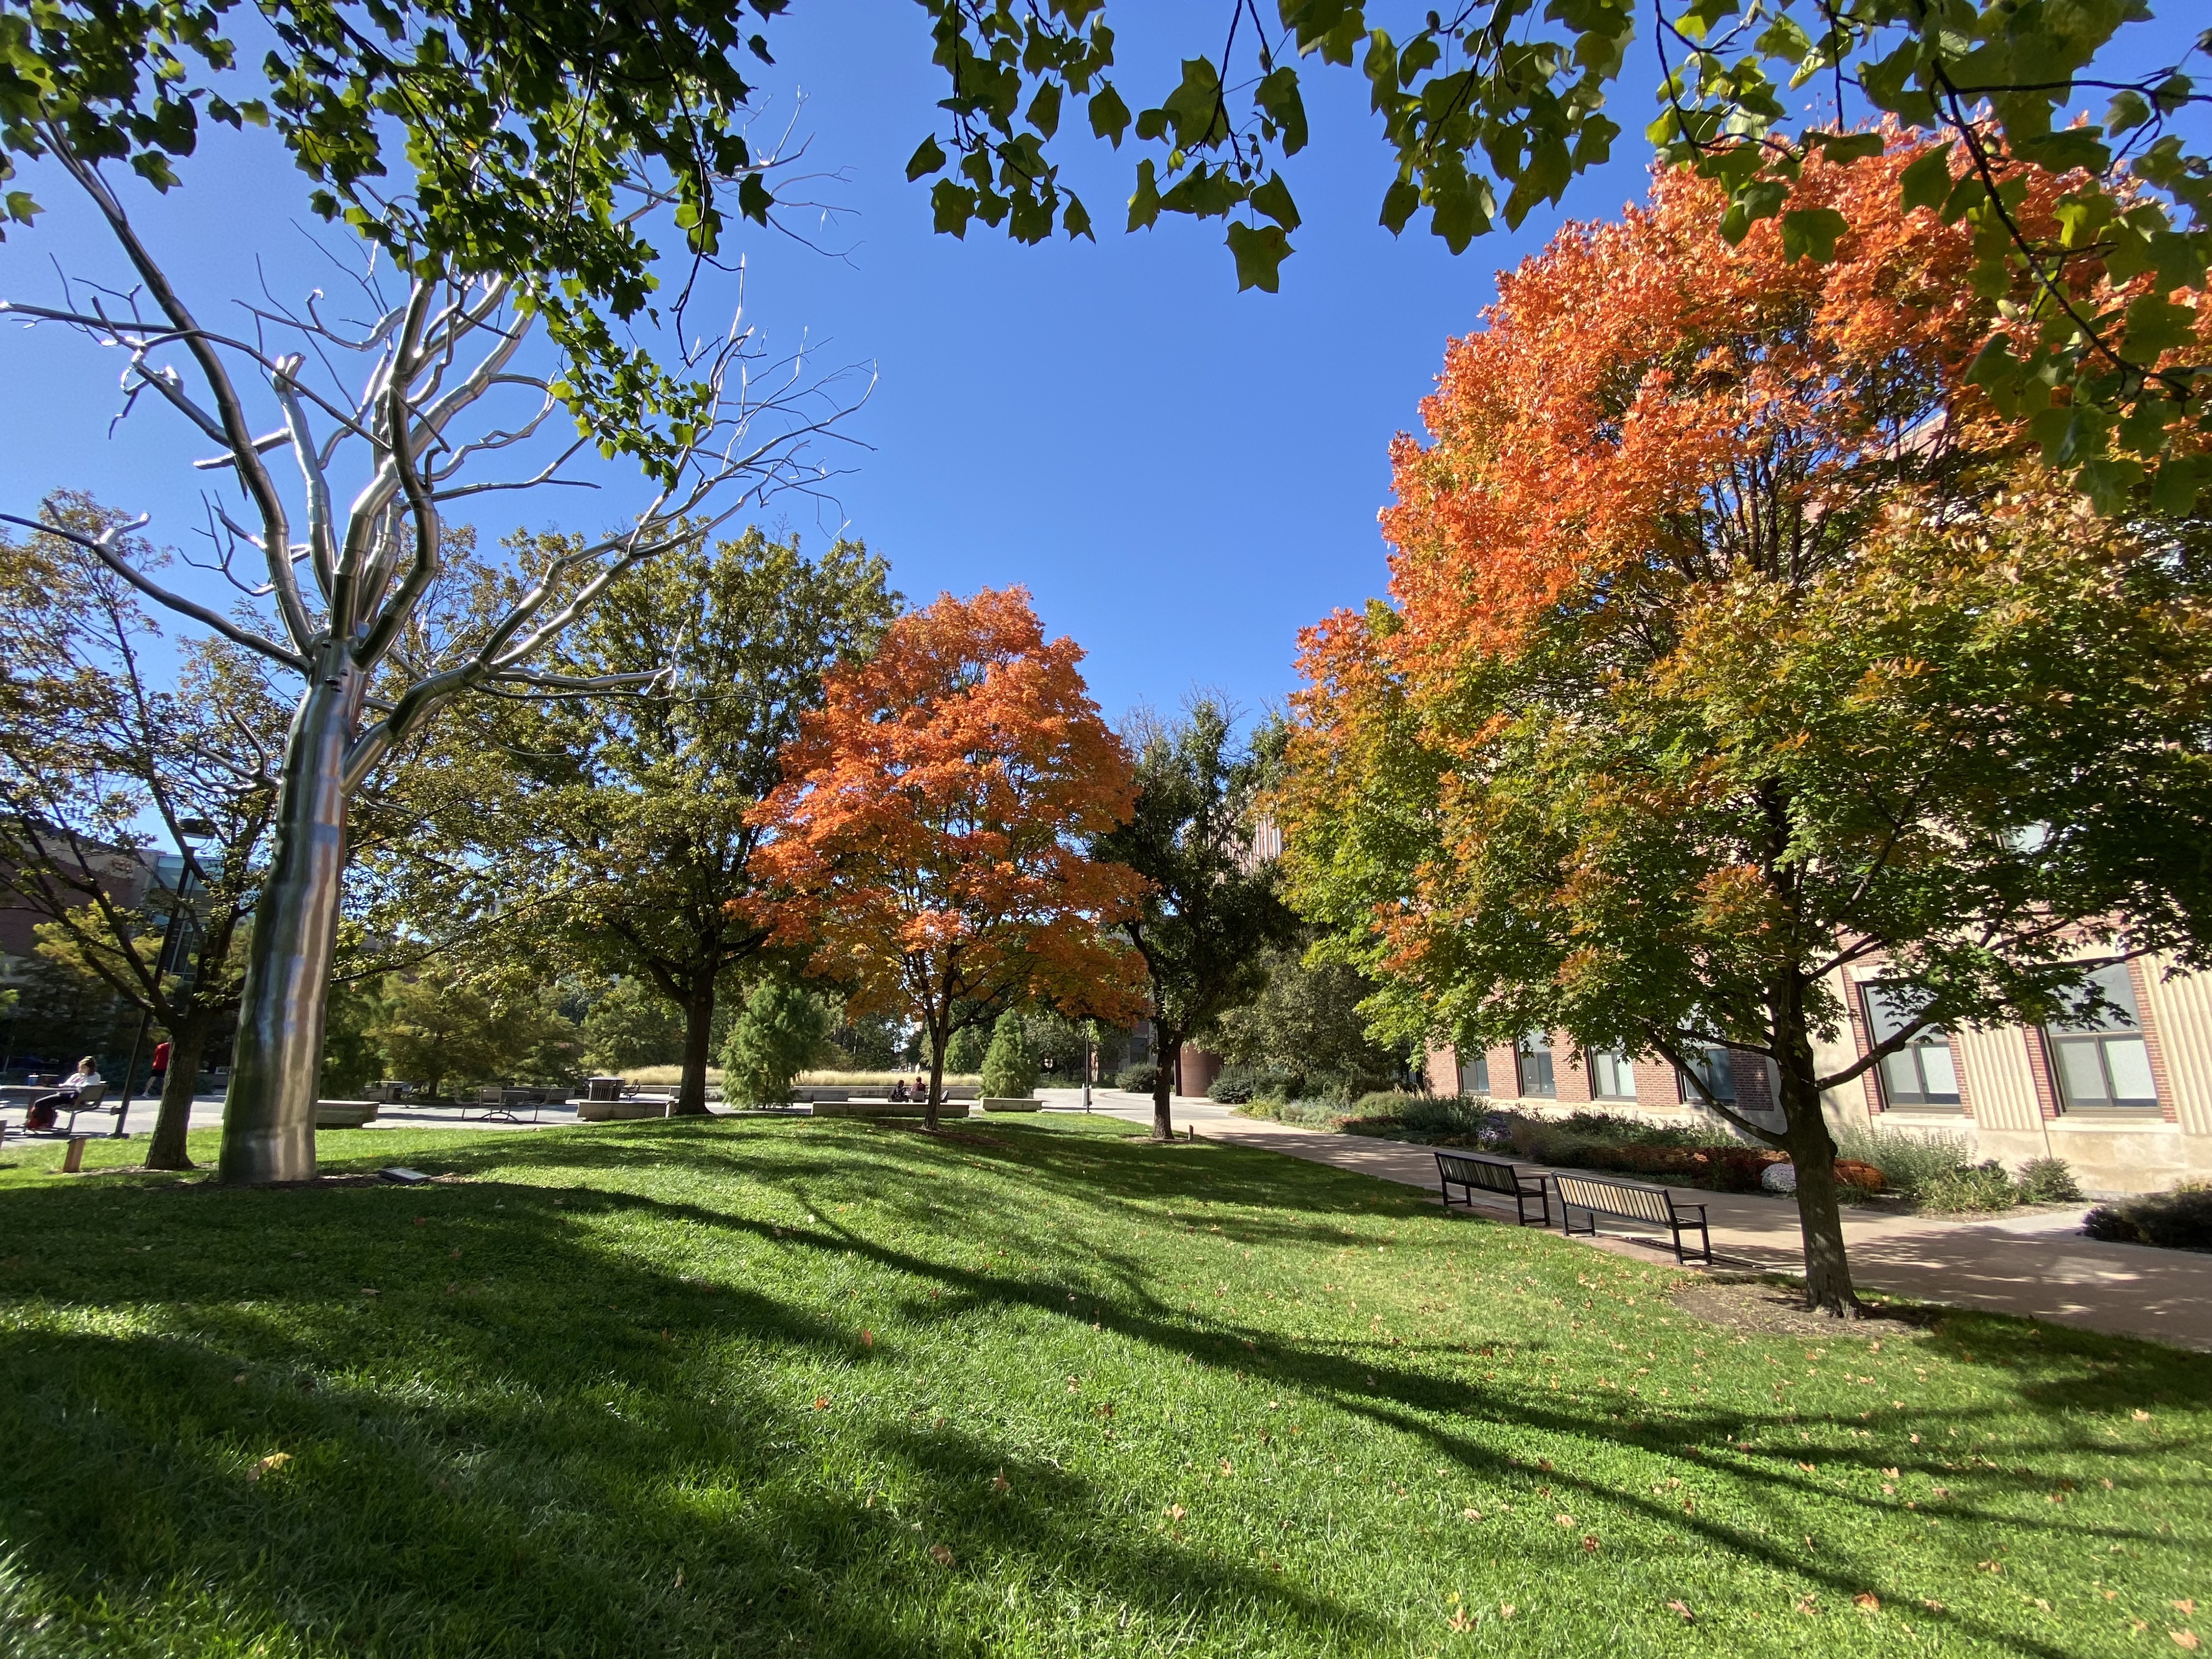 The leaves on campus trees between Andrews Hall and Love Library turn from green to orange.